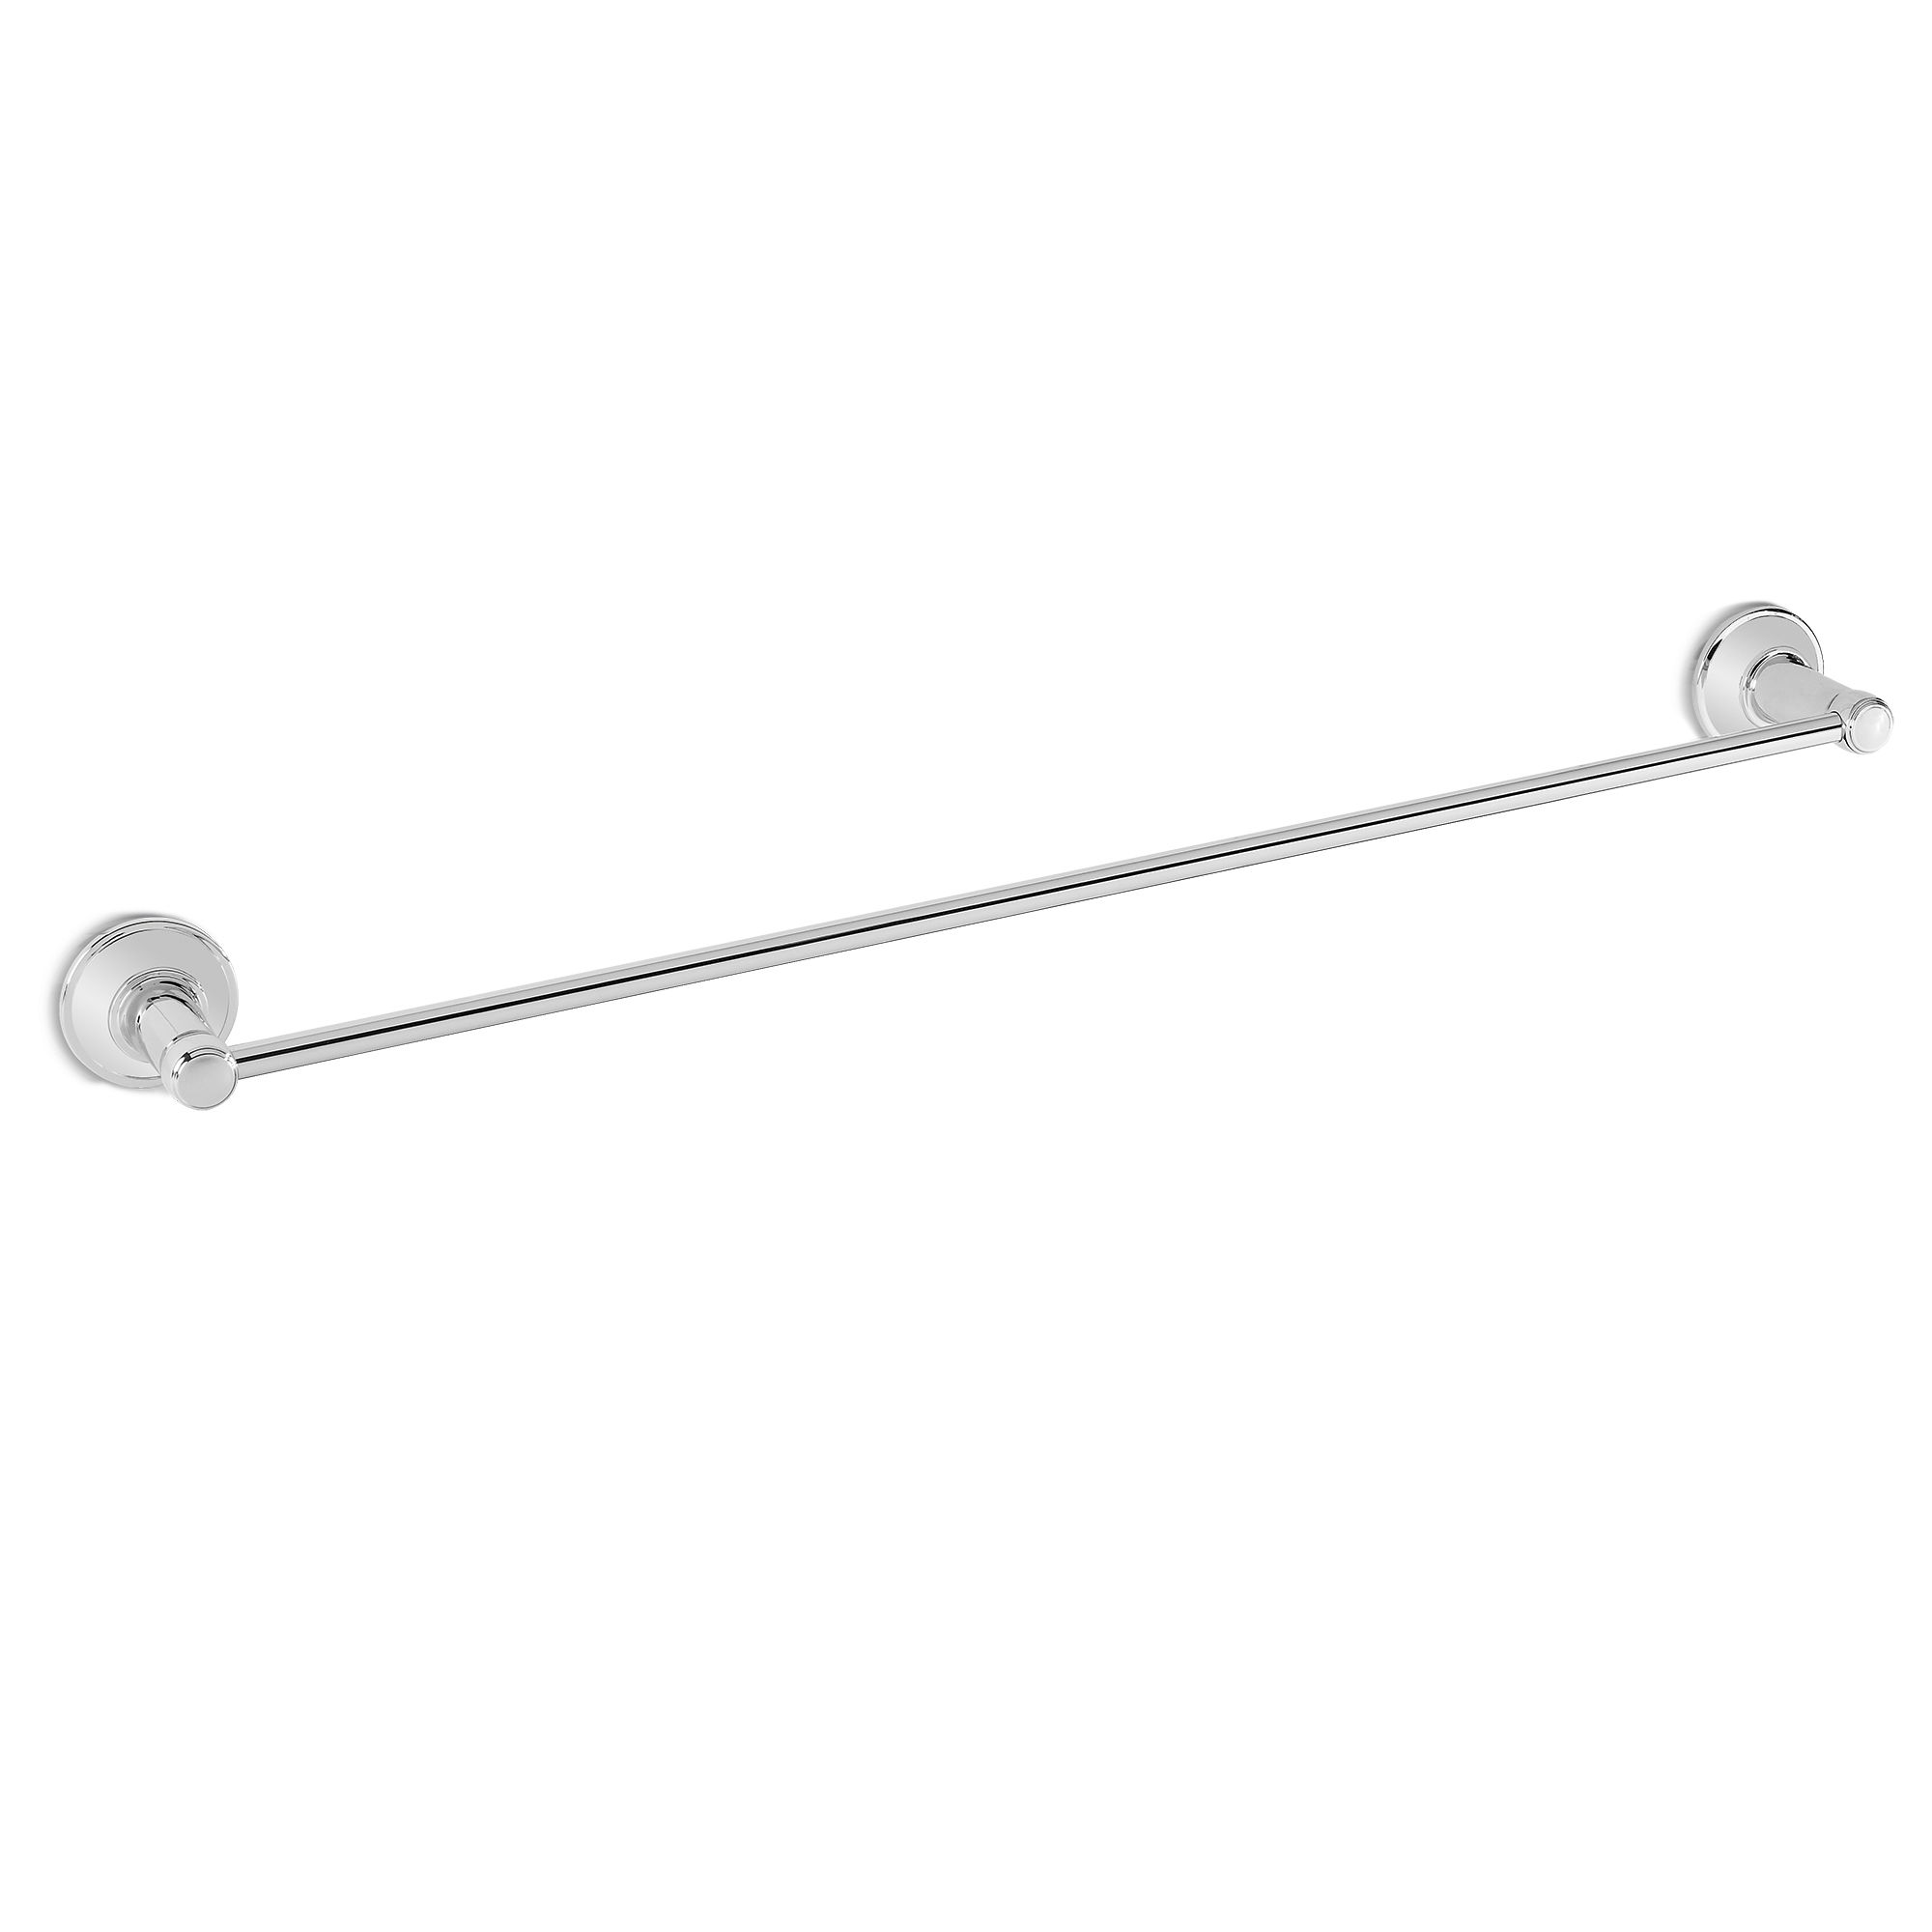 Transitional Collection Series A 24" Towel Bar